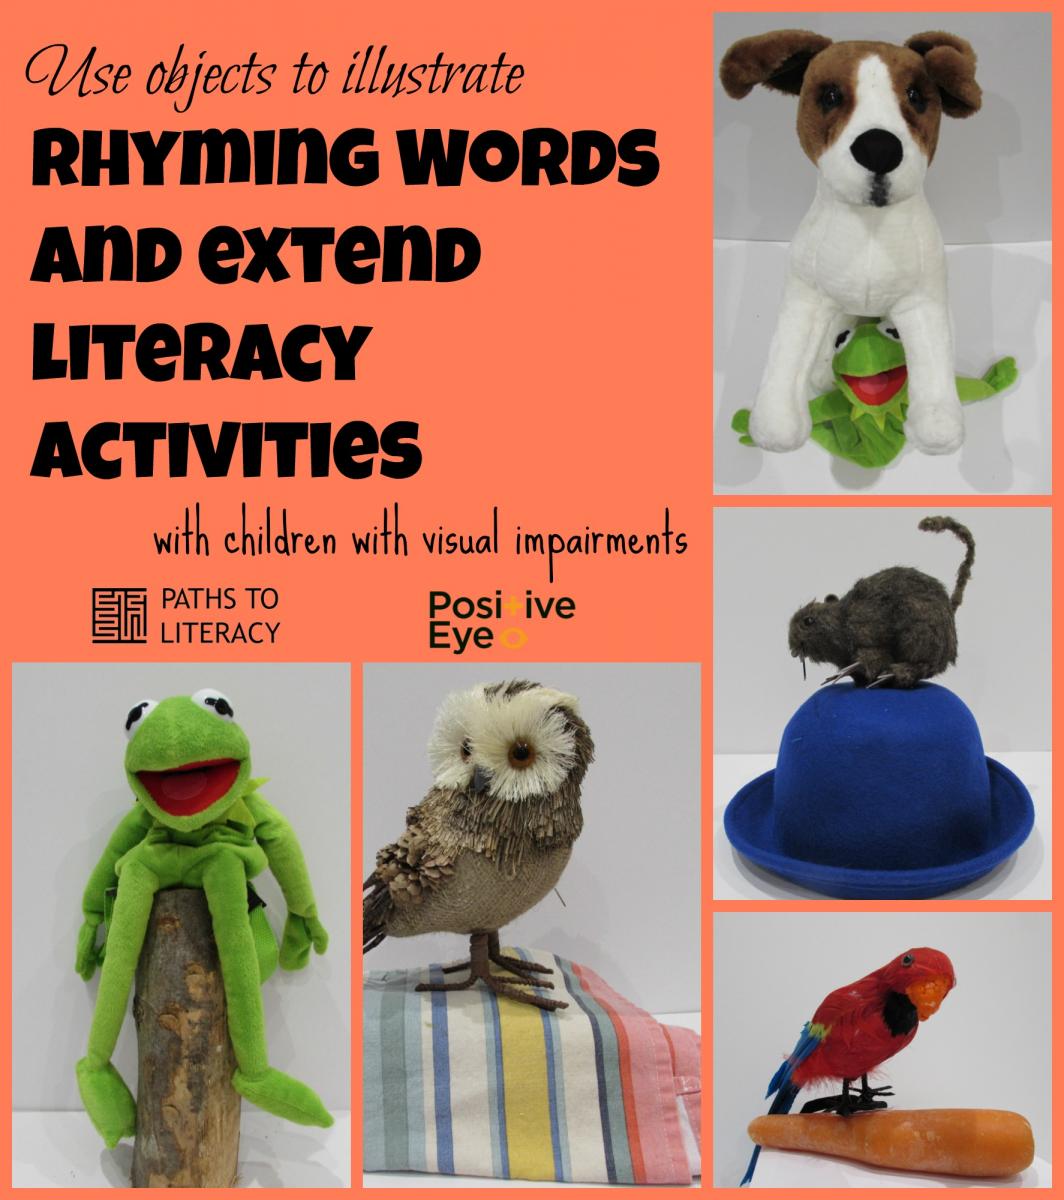 Rhyming words collage